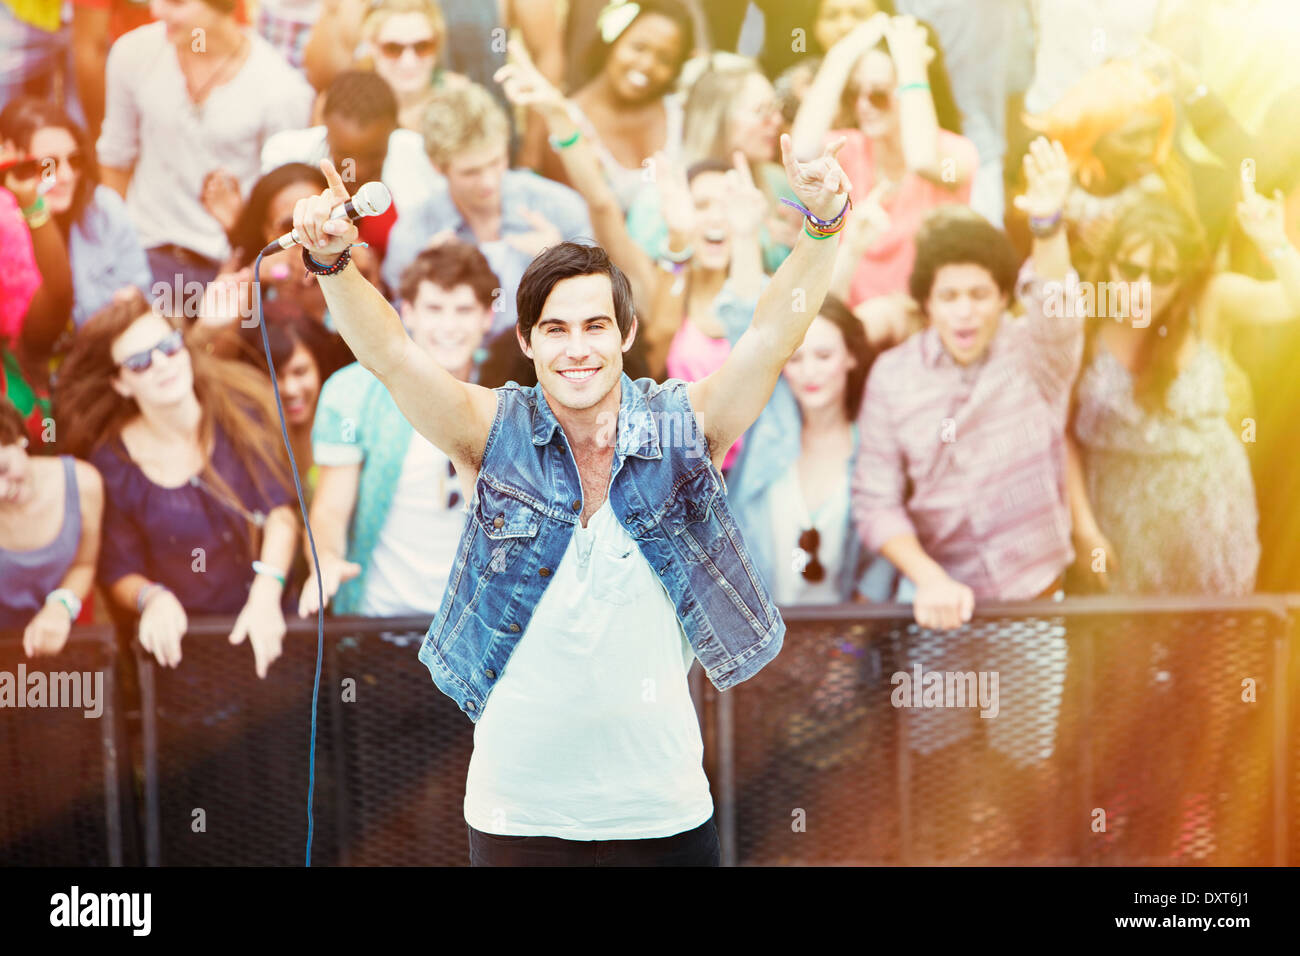 Portrait of performer with fans in background at music festival Stock Photo